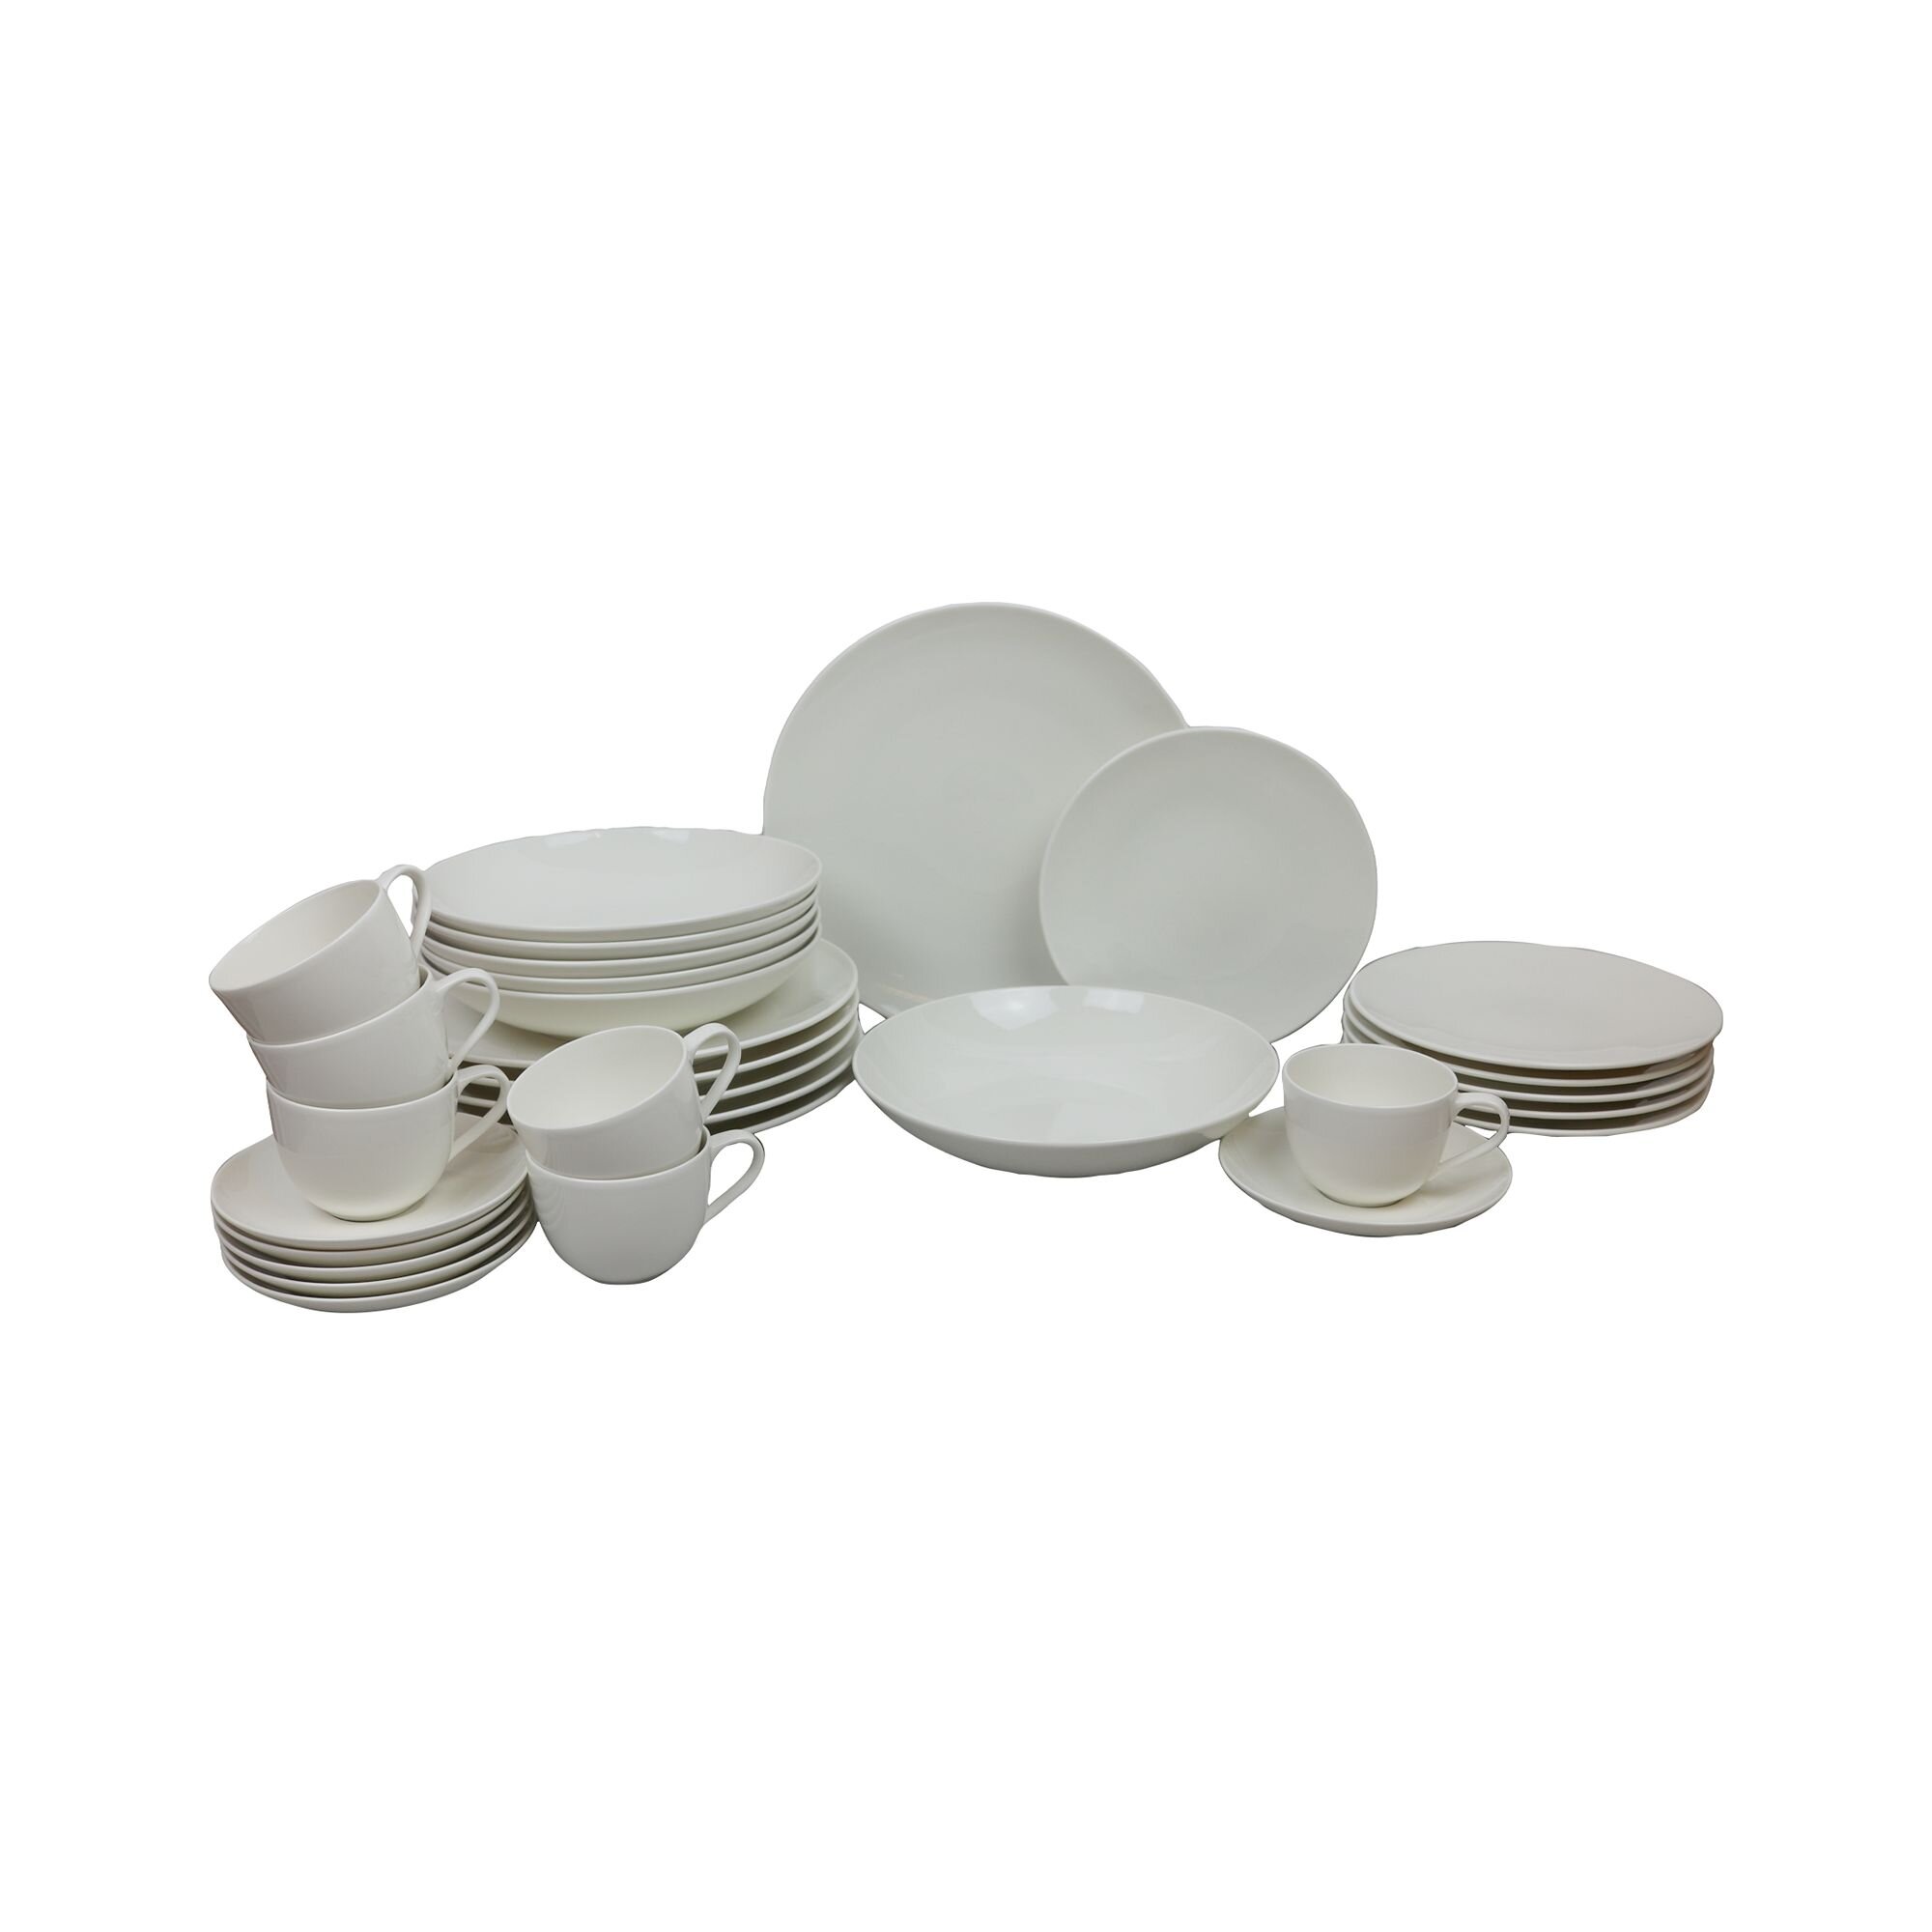 Villeroy & Boch For Me 30 Piece Dinnerware Set, Service for 6 & Reviews